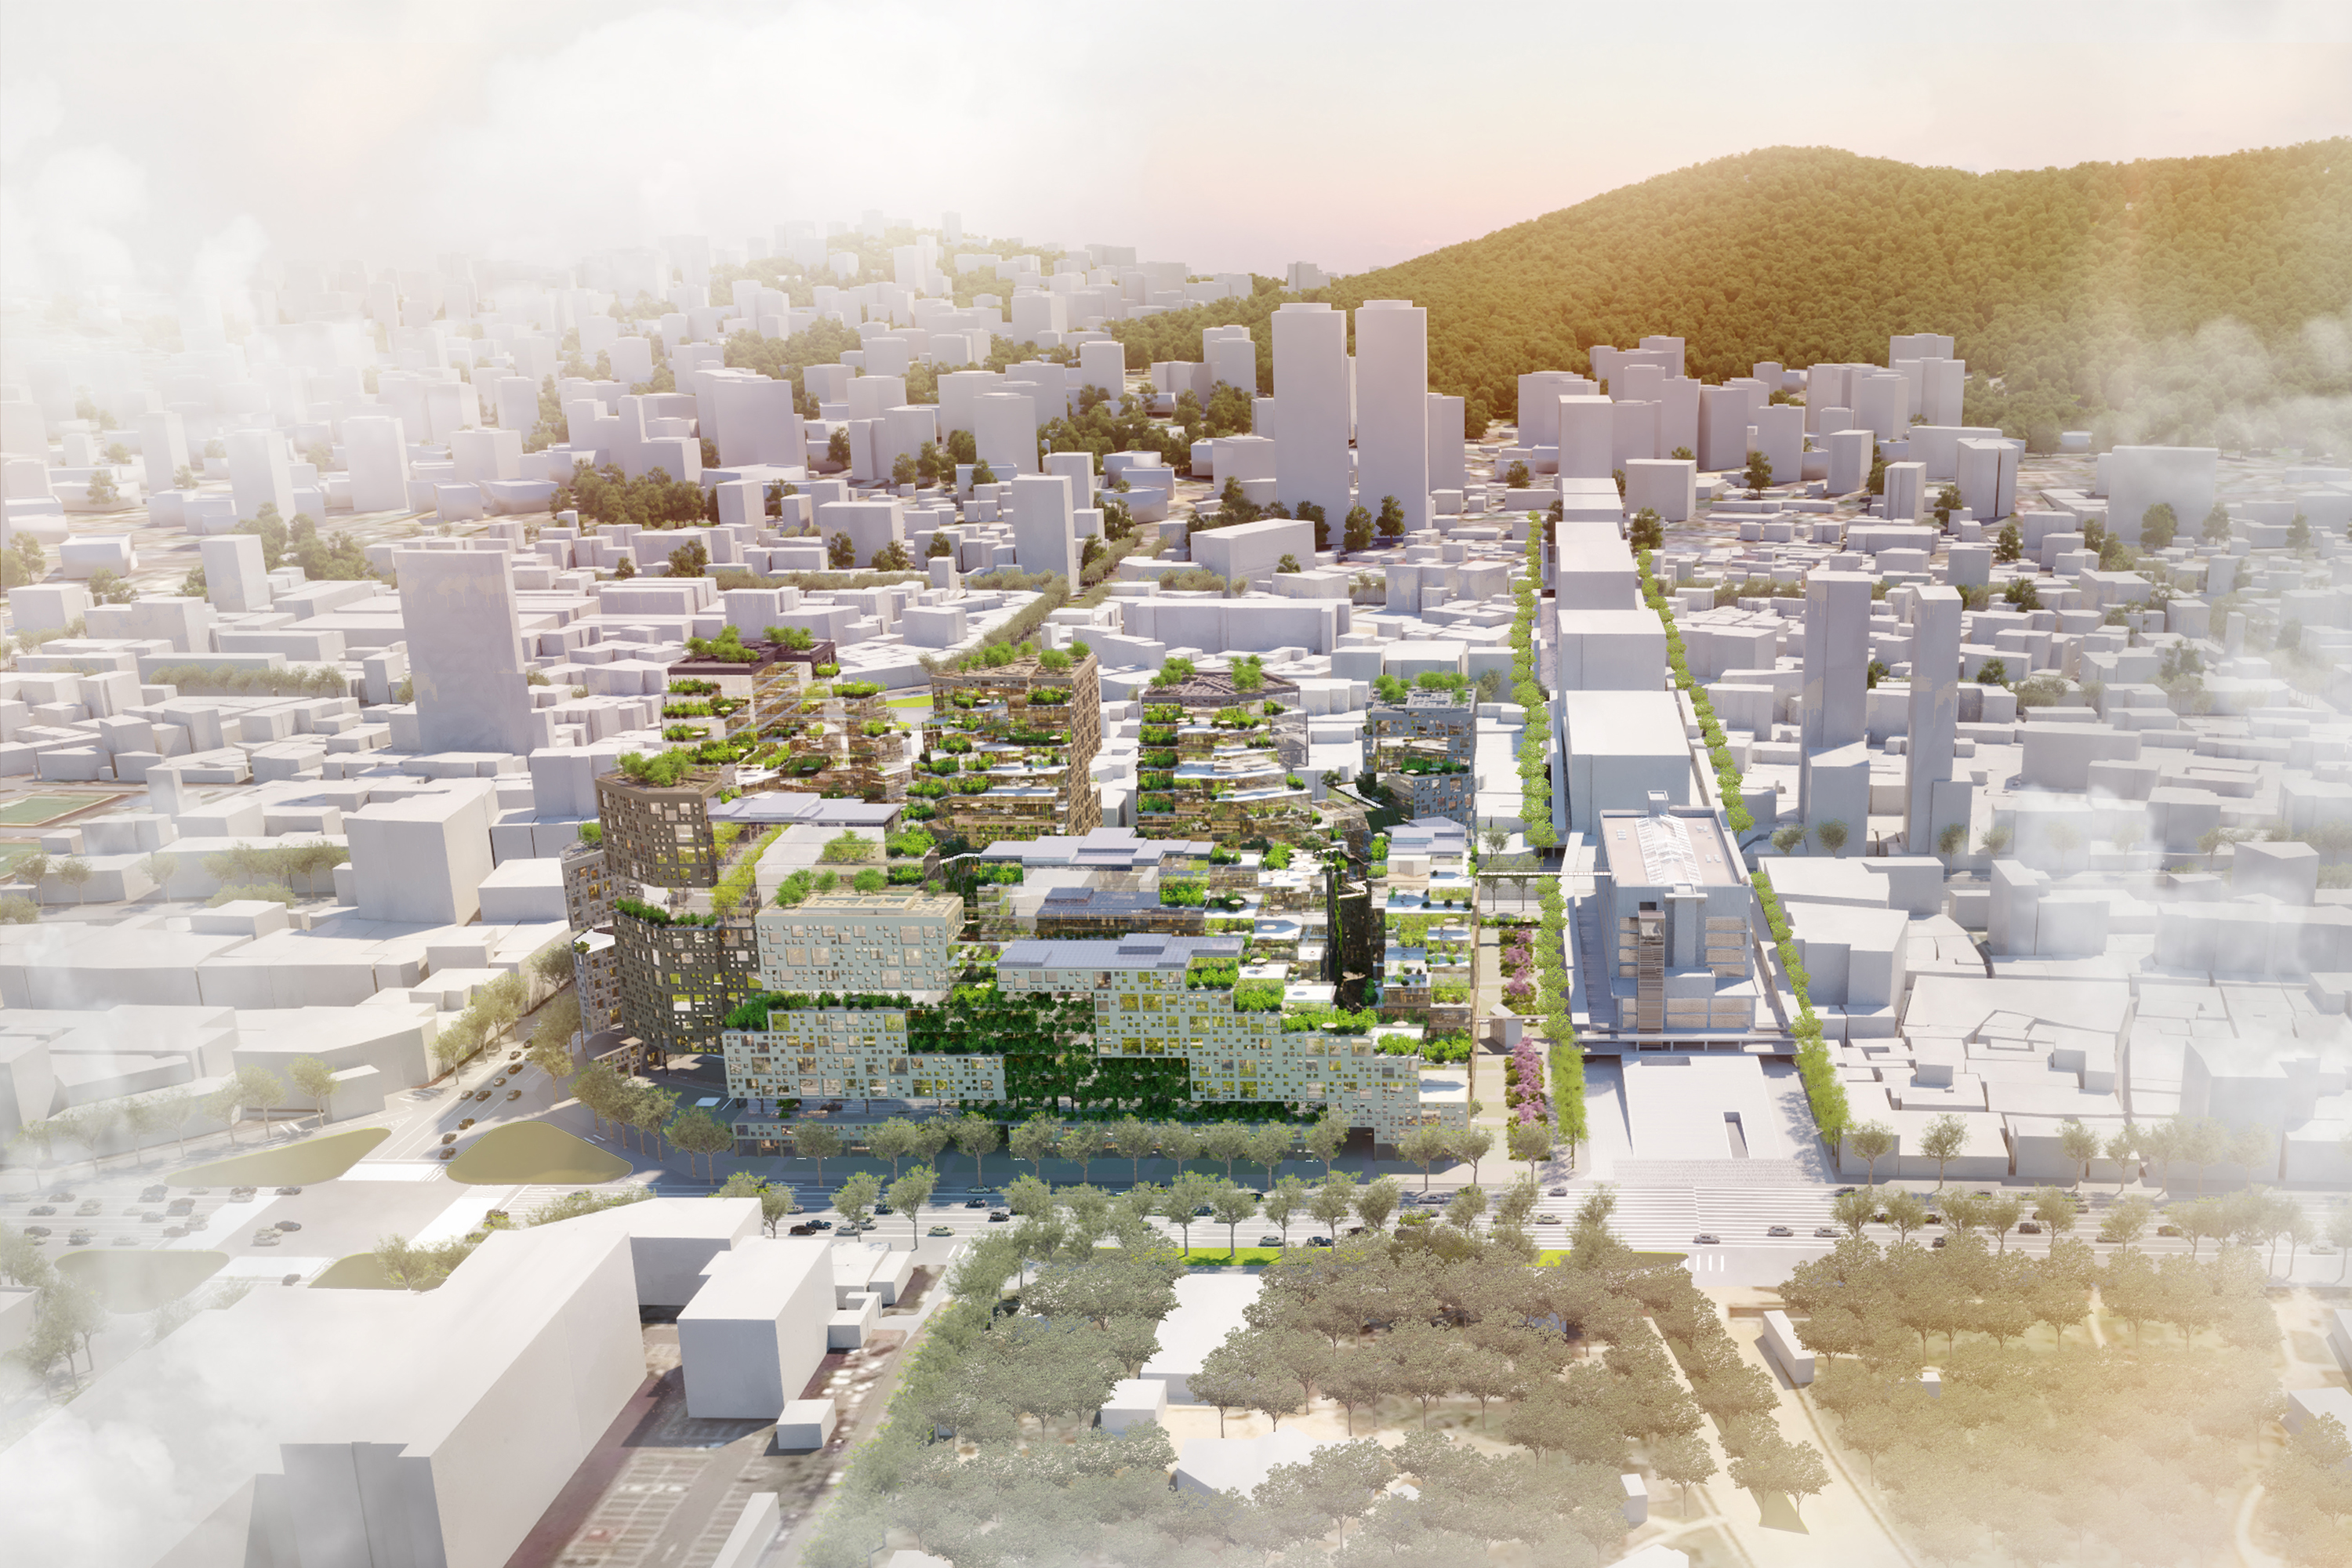 KCAP wins international design competition ‘Sewoon District', in Seoul